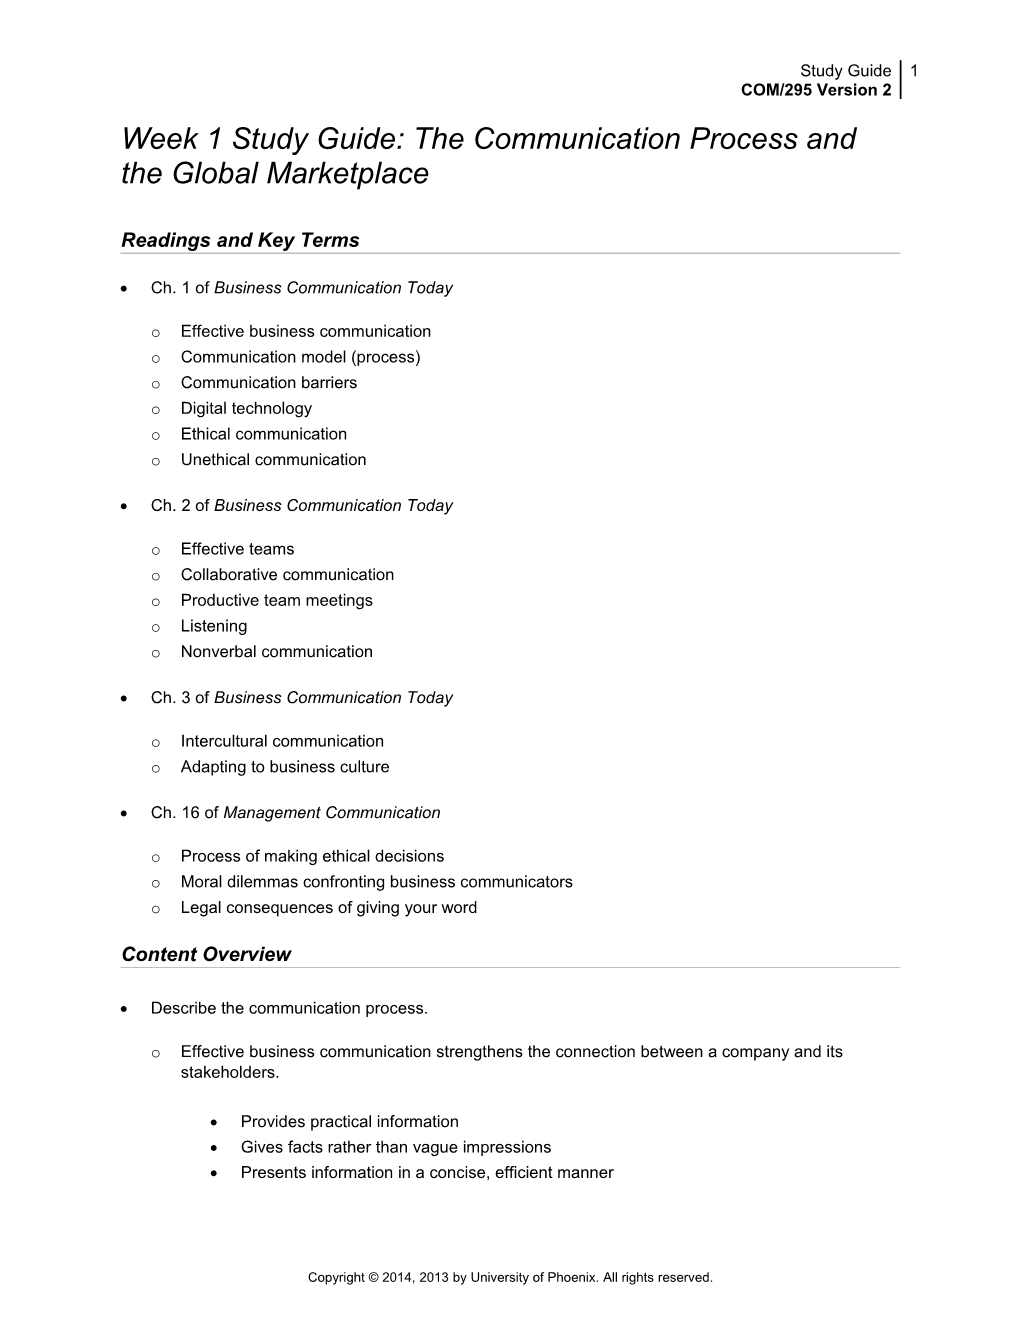 Week 1Study Guide: the Communication Process and the Global Marketplace